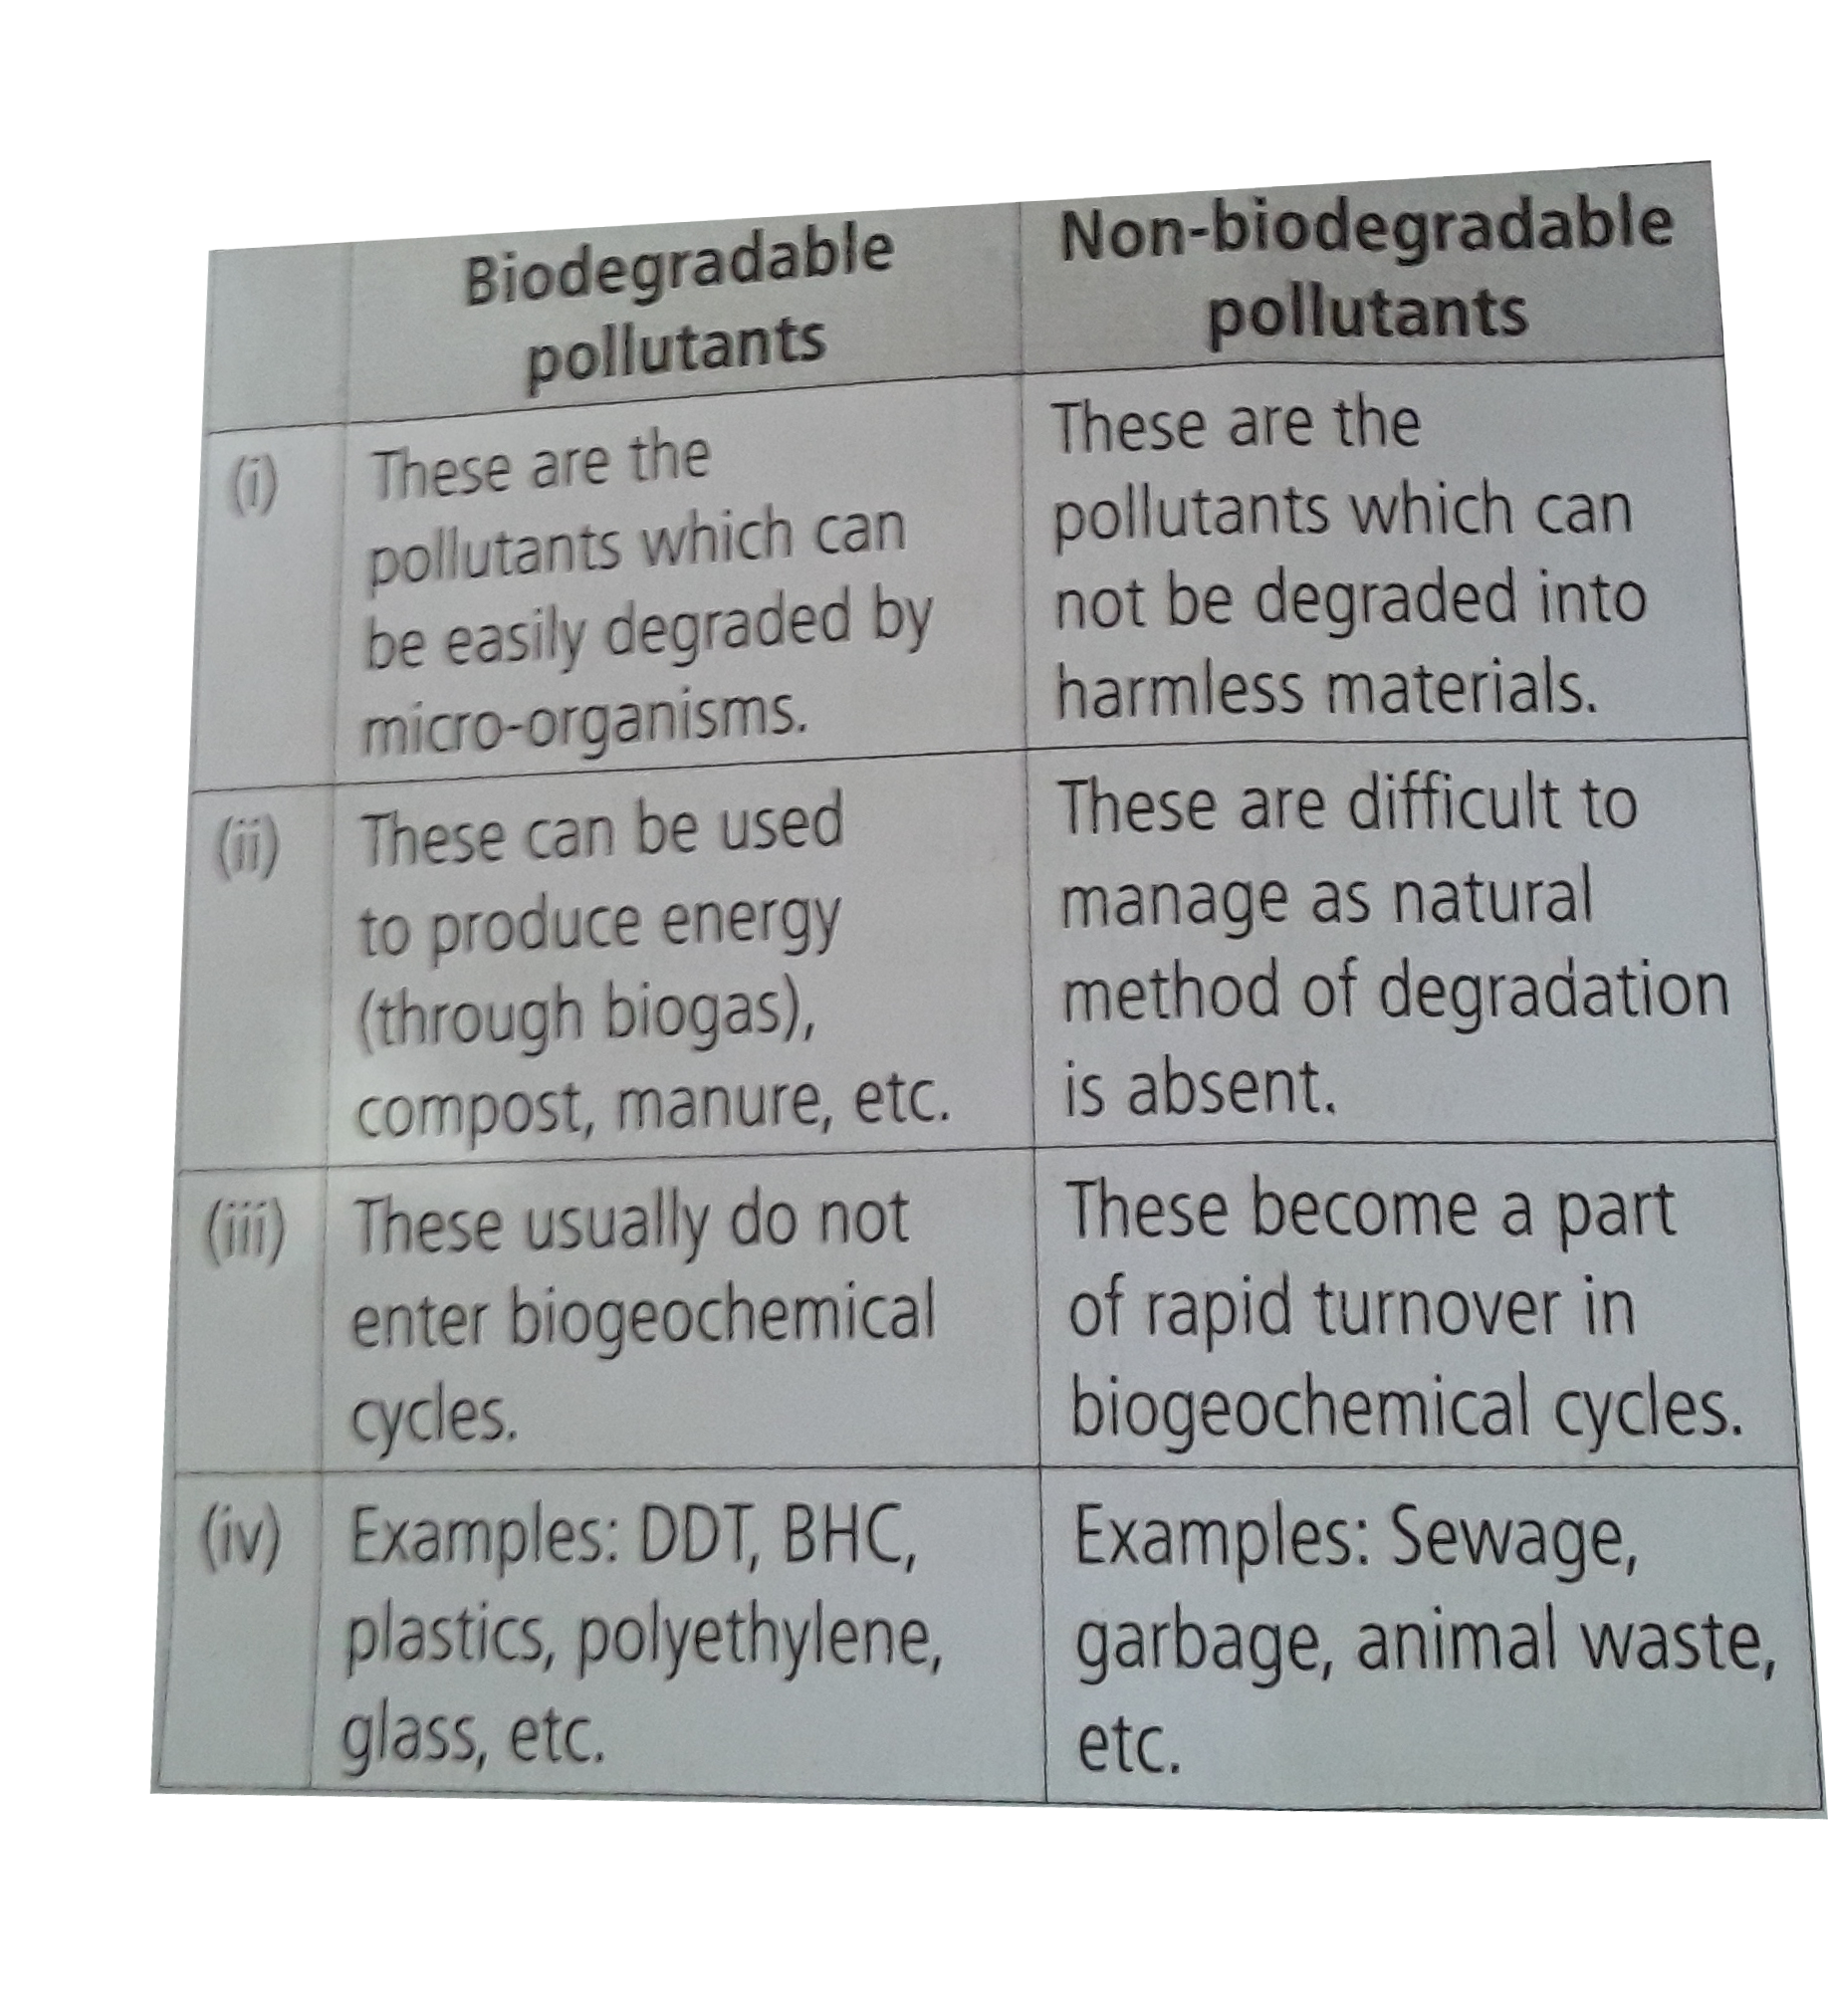 The following table summarises the differences between biodegradable and non-biodegradable pollutants. Pick out the wrong diggerences and select the correct answer.